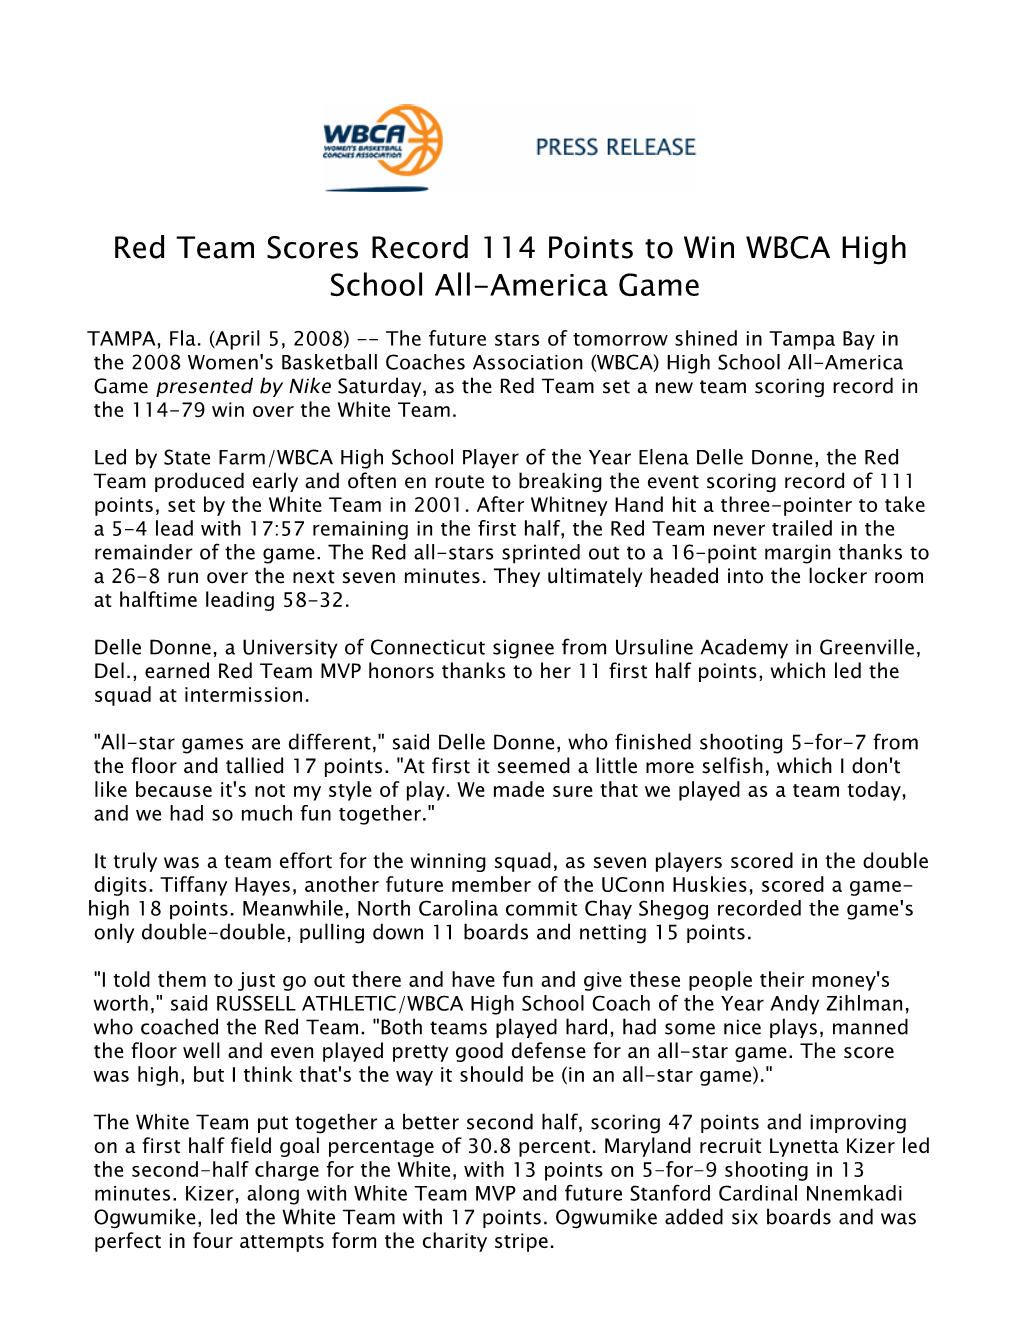 Red Team Scores Record 114 Points to Win WBCA High School All-America Game